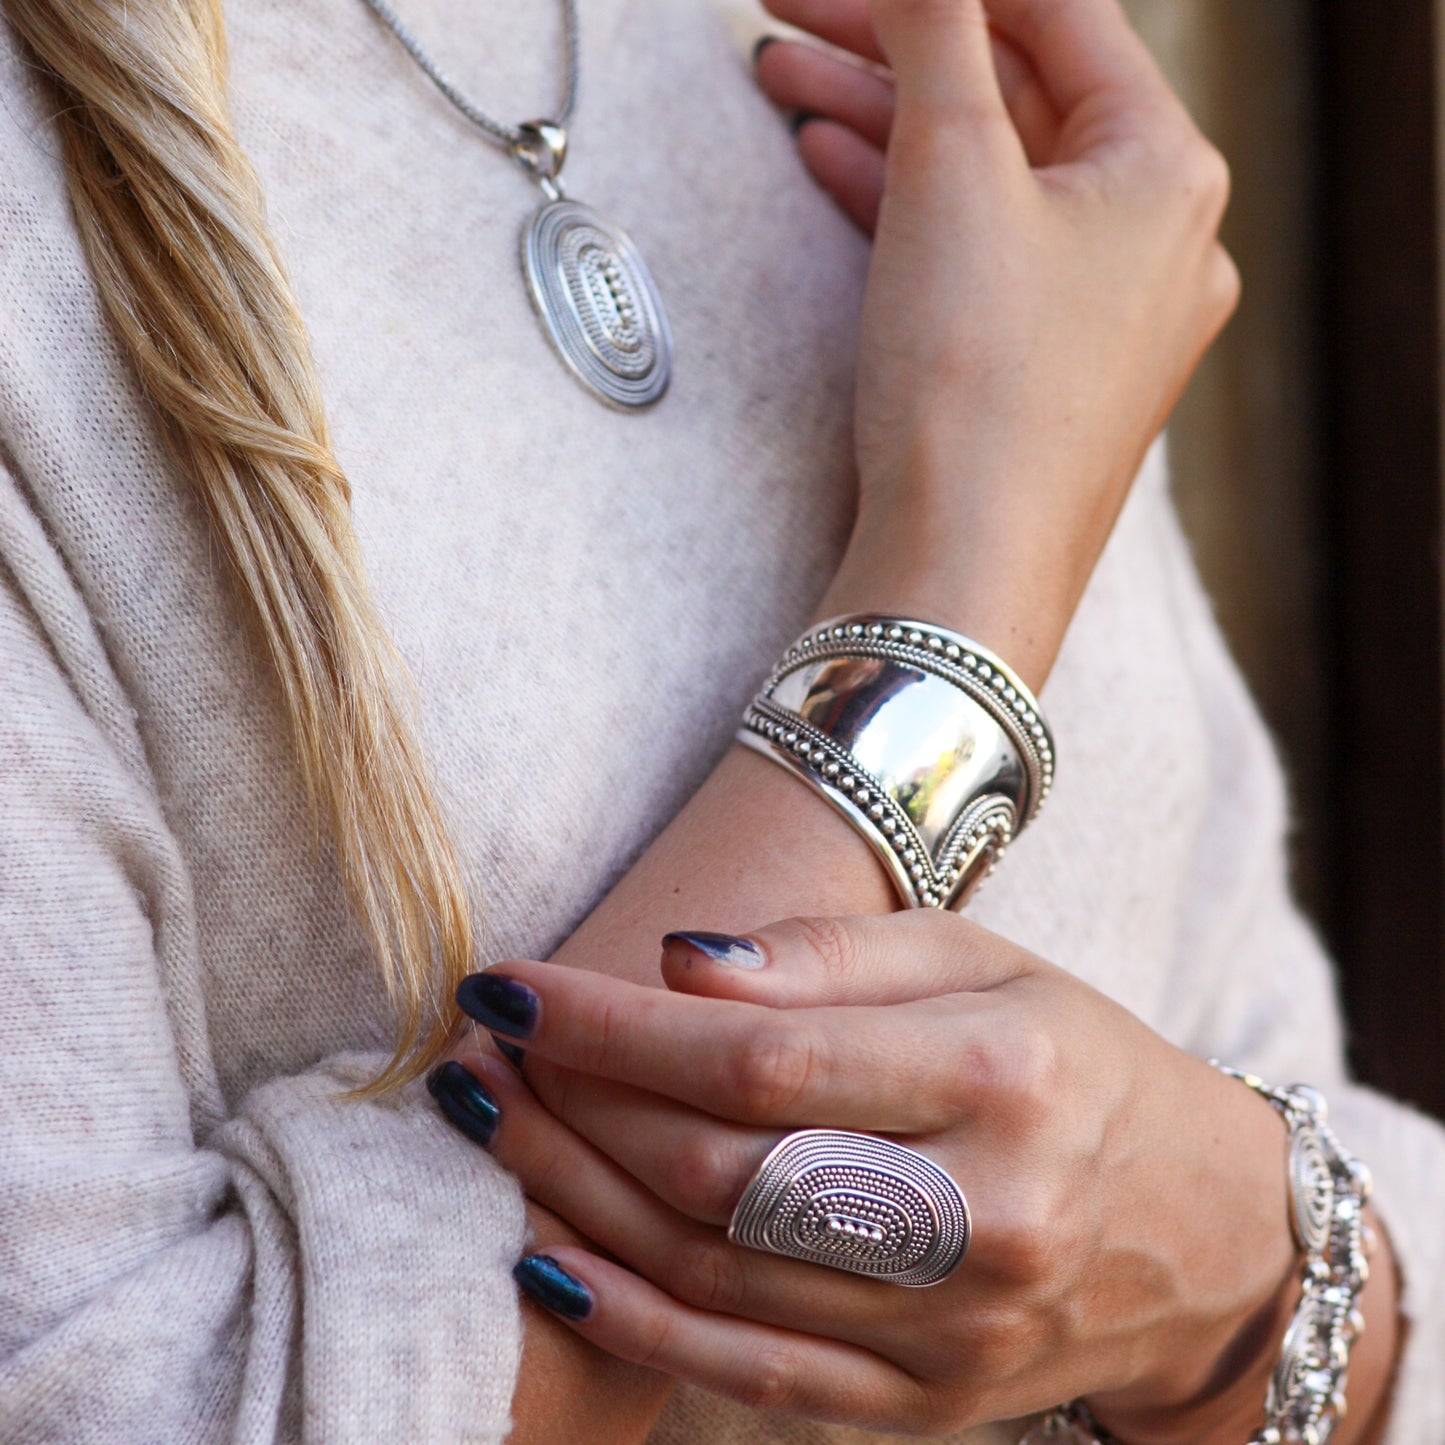 Woman wearing a beaded oval silver cuff bracelet, ring and pendant.